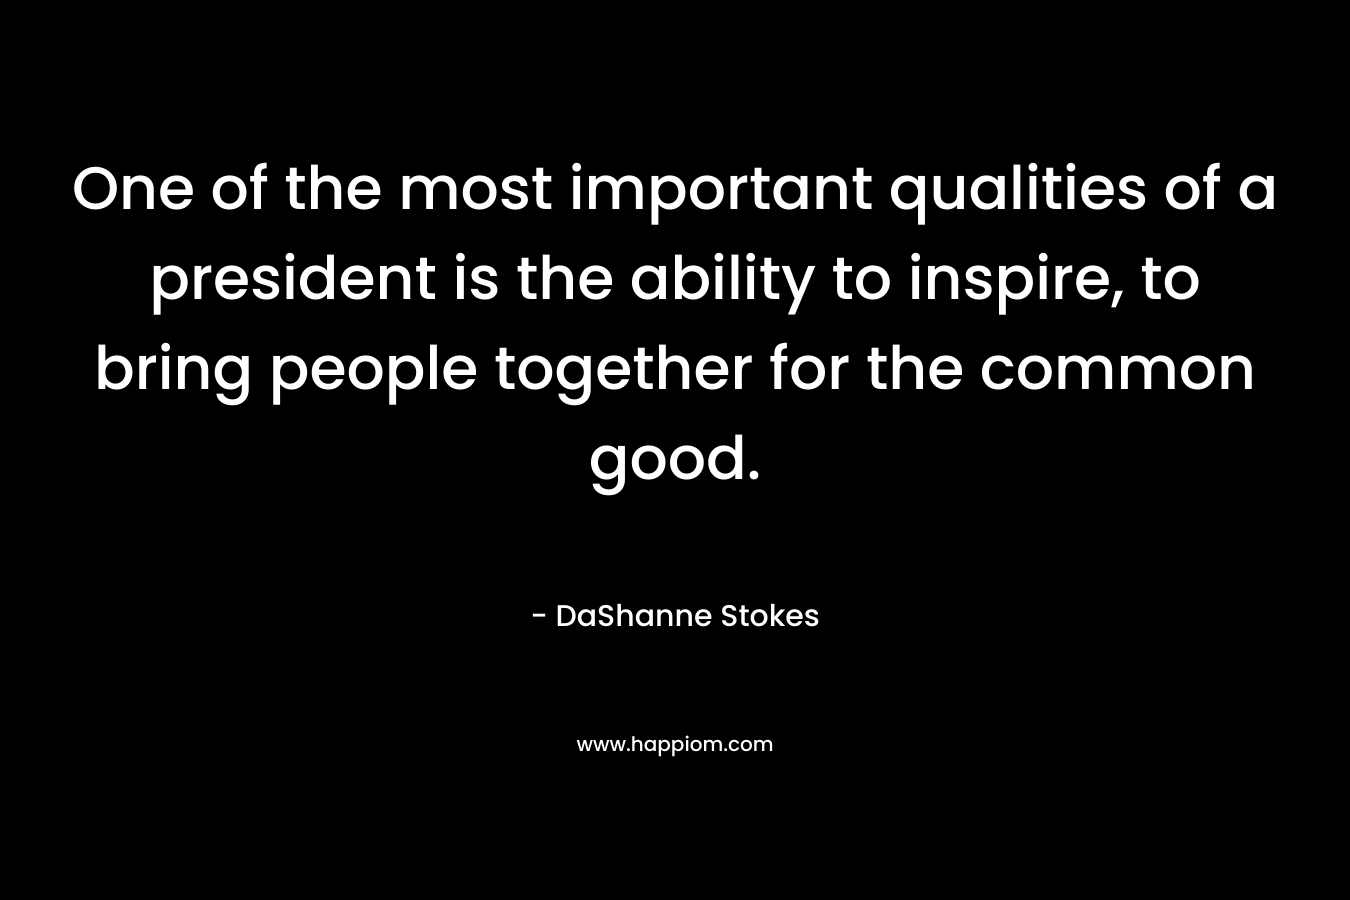 One of the most important qualities of a president is the ability to inspire, to bring people together for the common good.